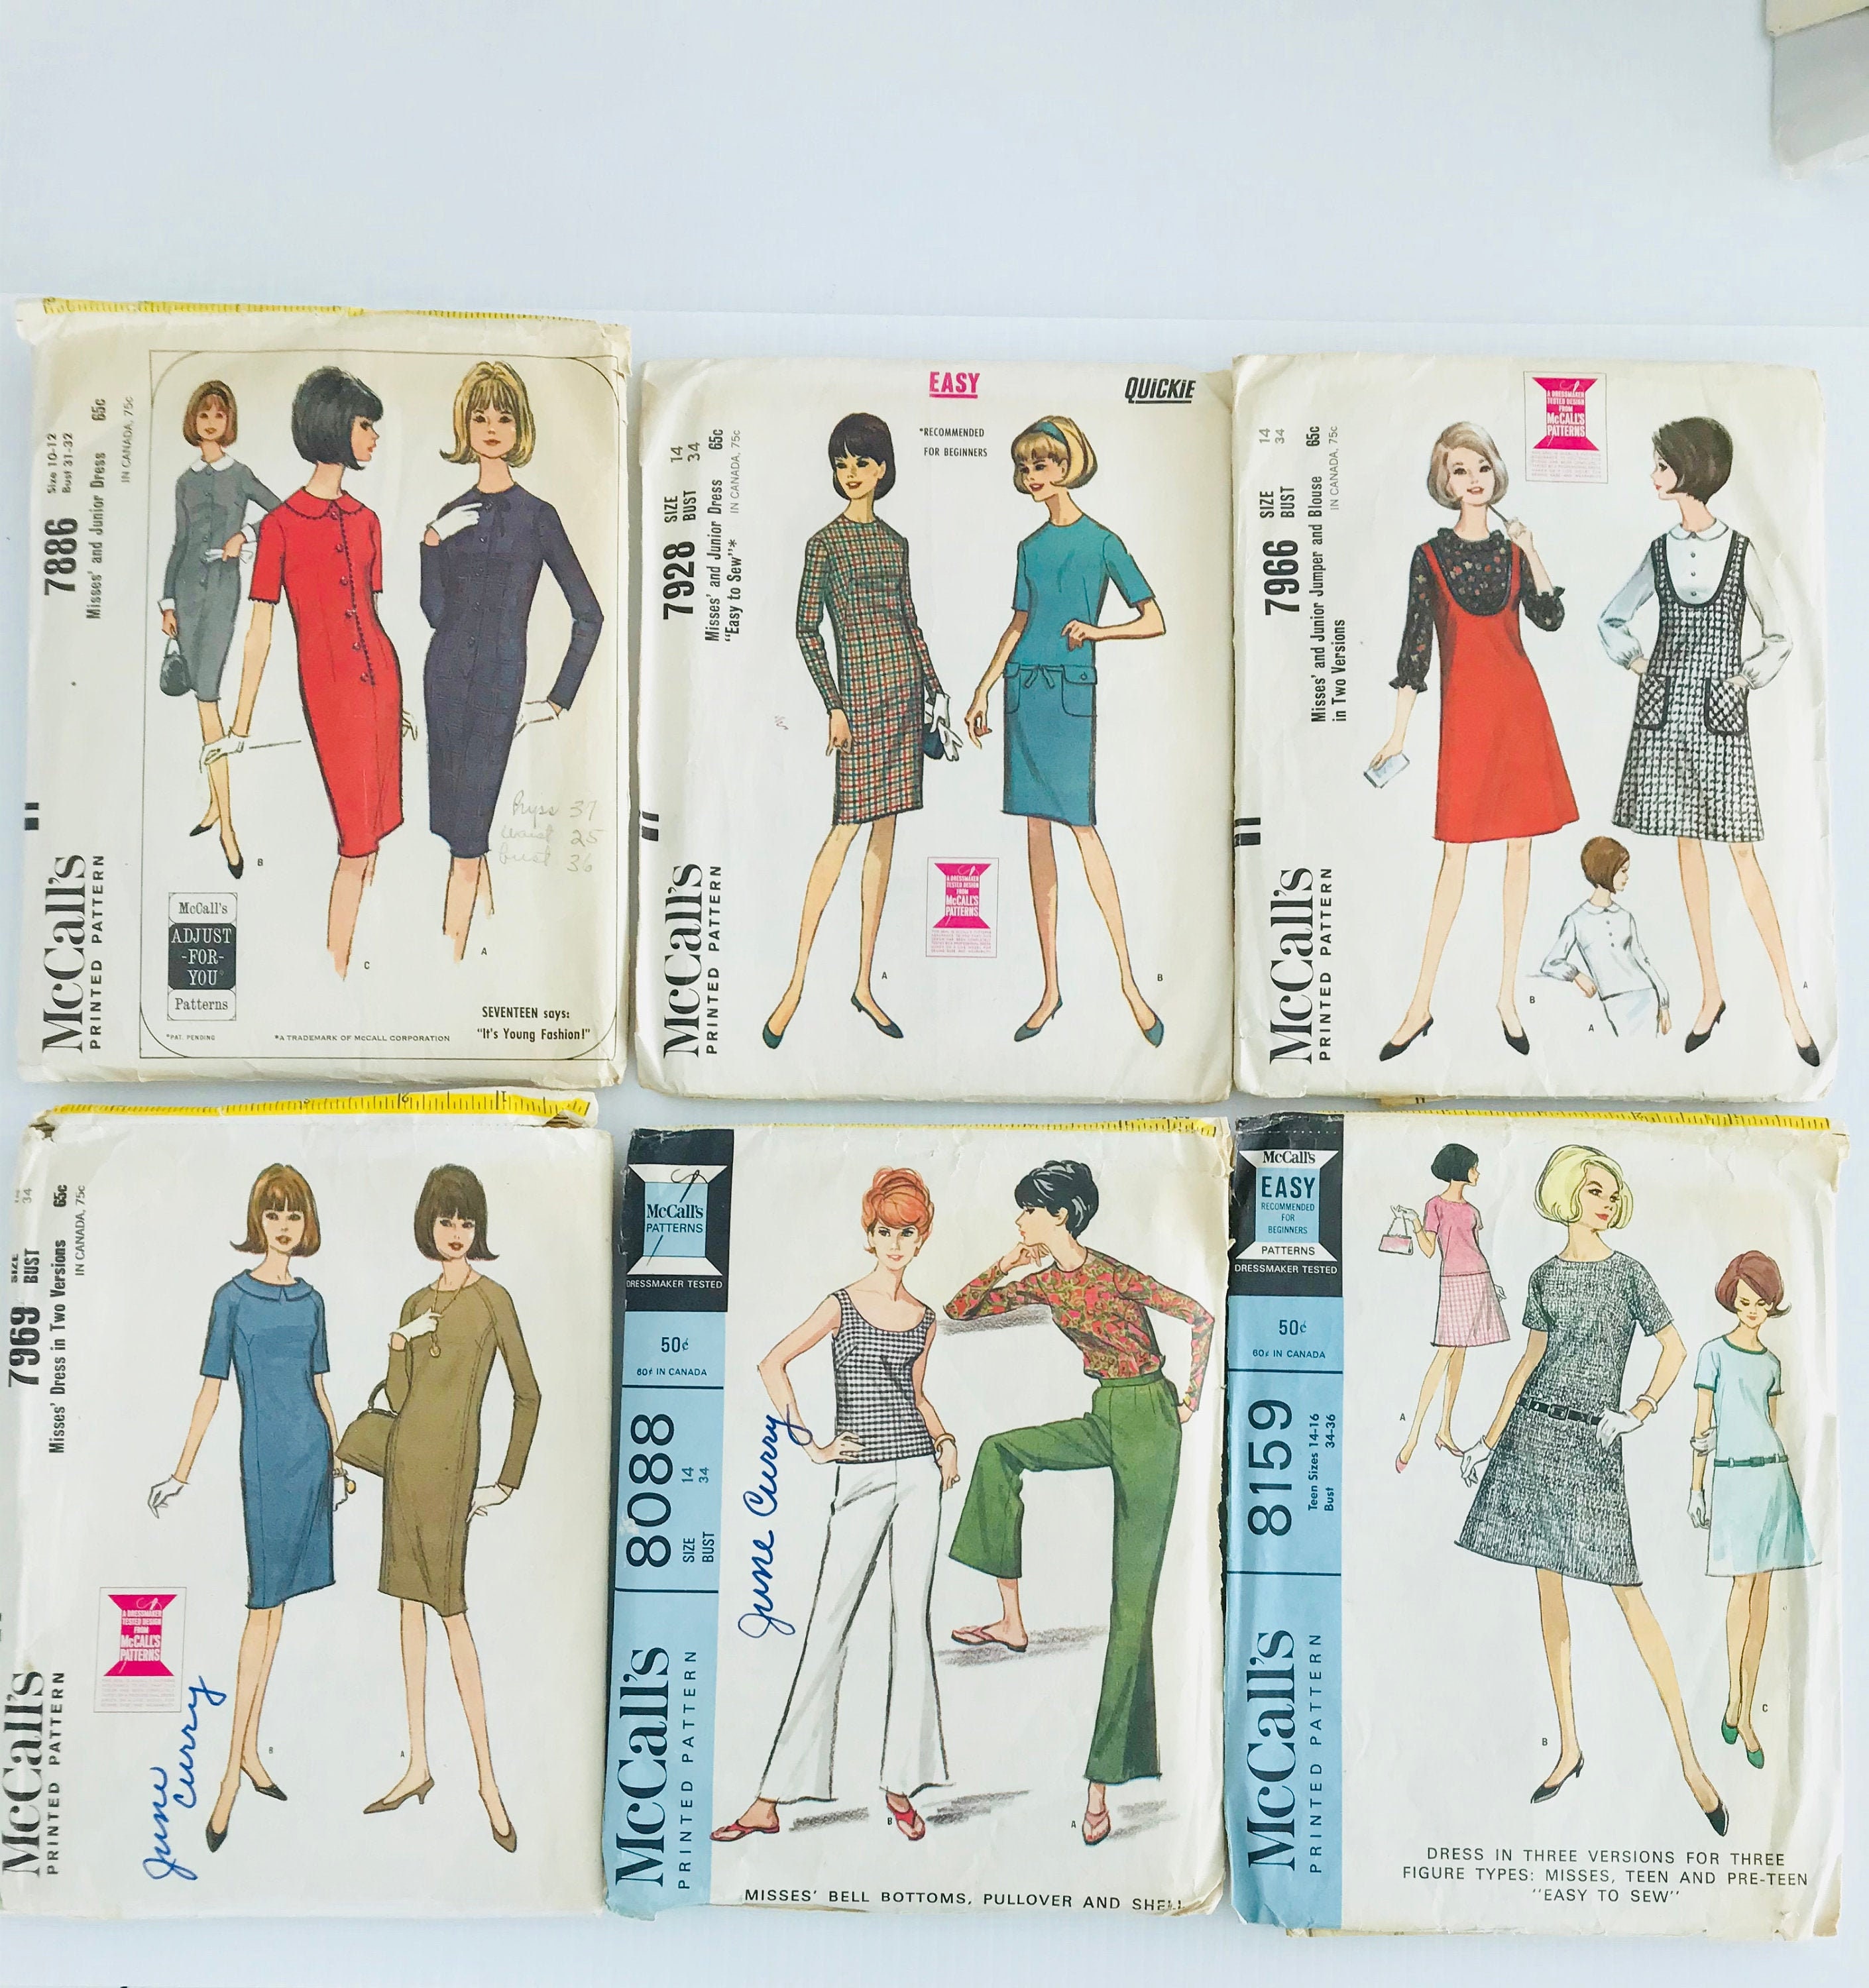 Vintage Mccalls Sewing Patterns Dated 1965 for Ladies Dresses - Etsy